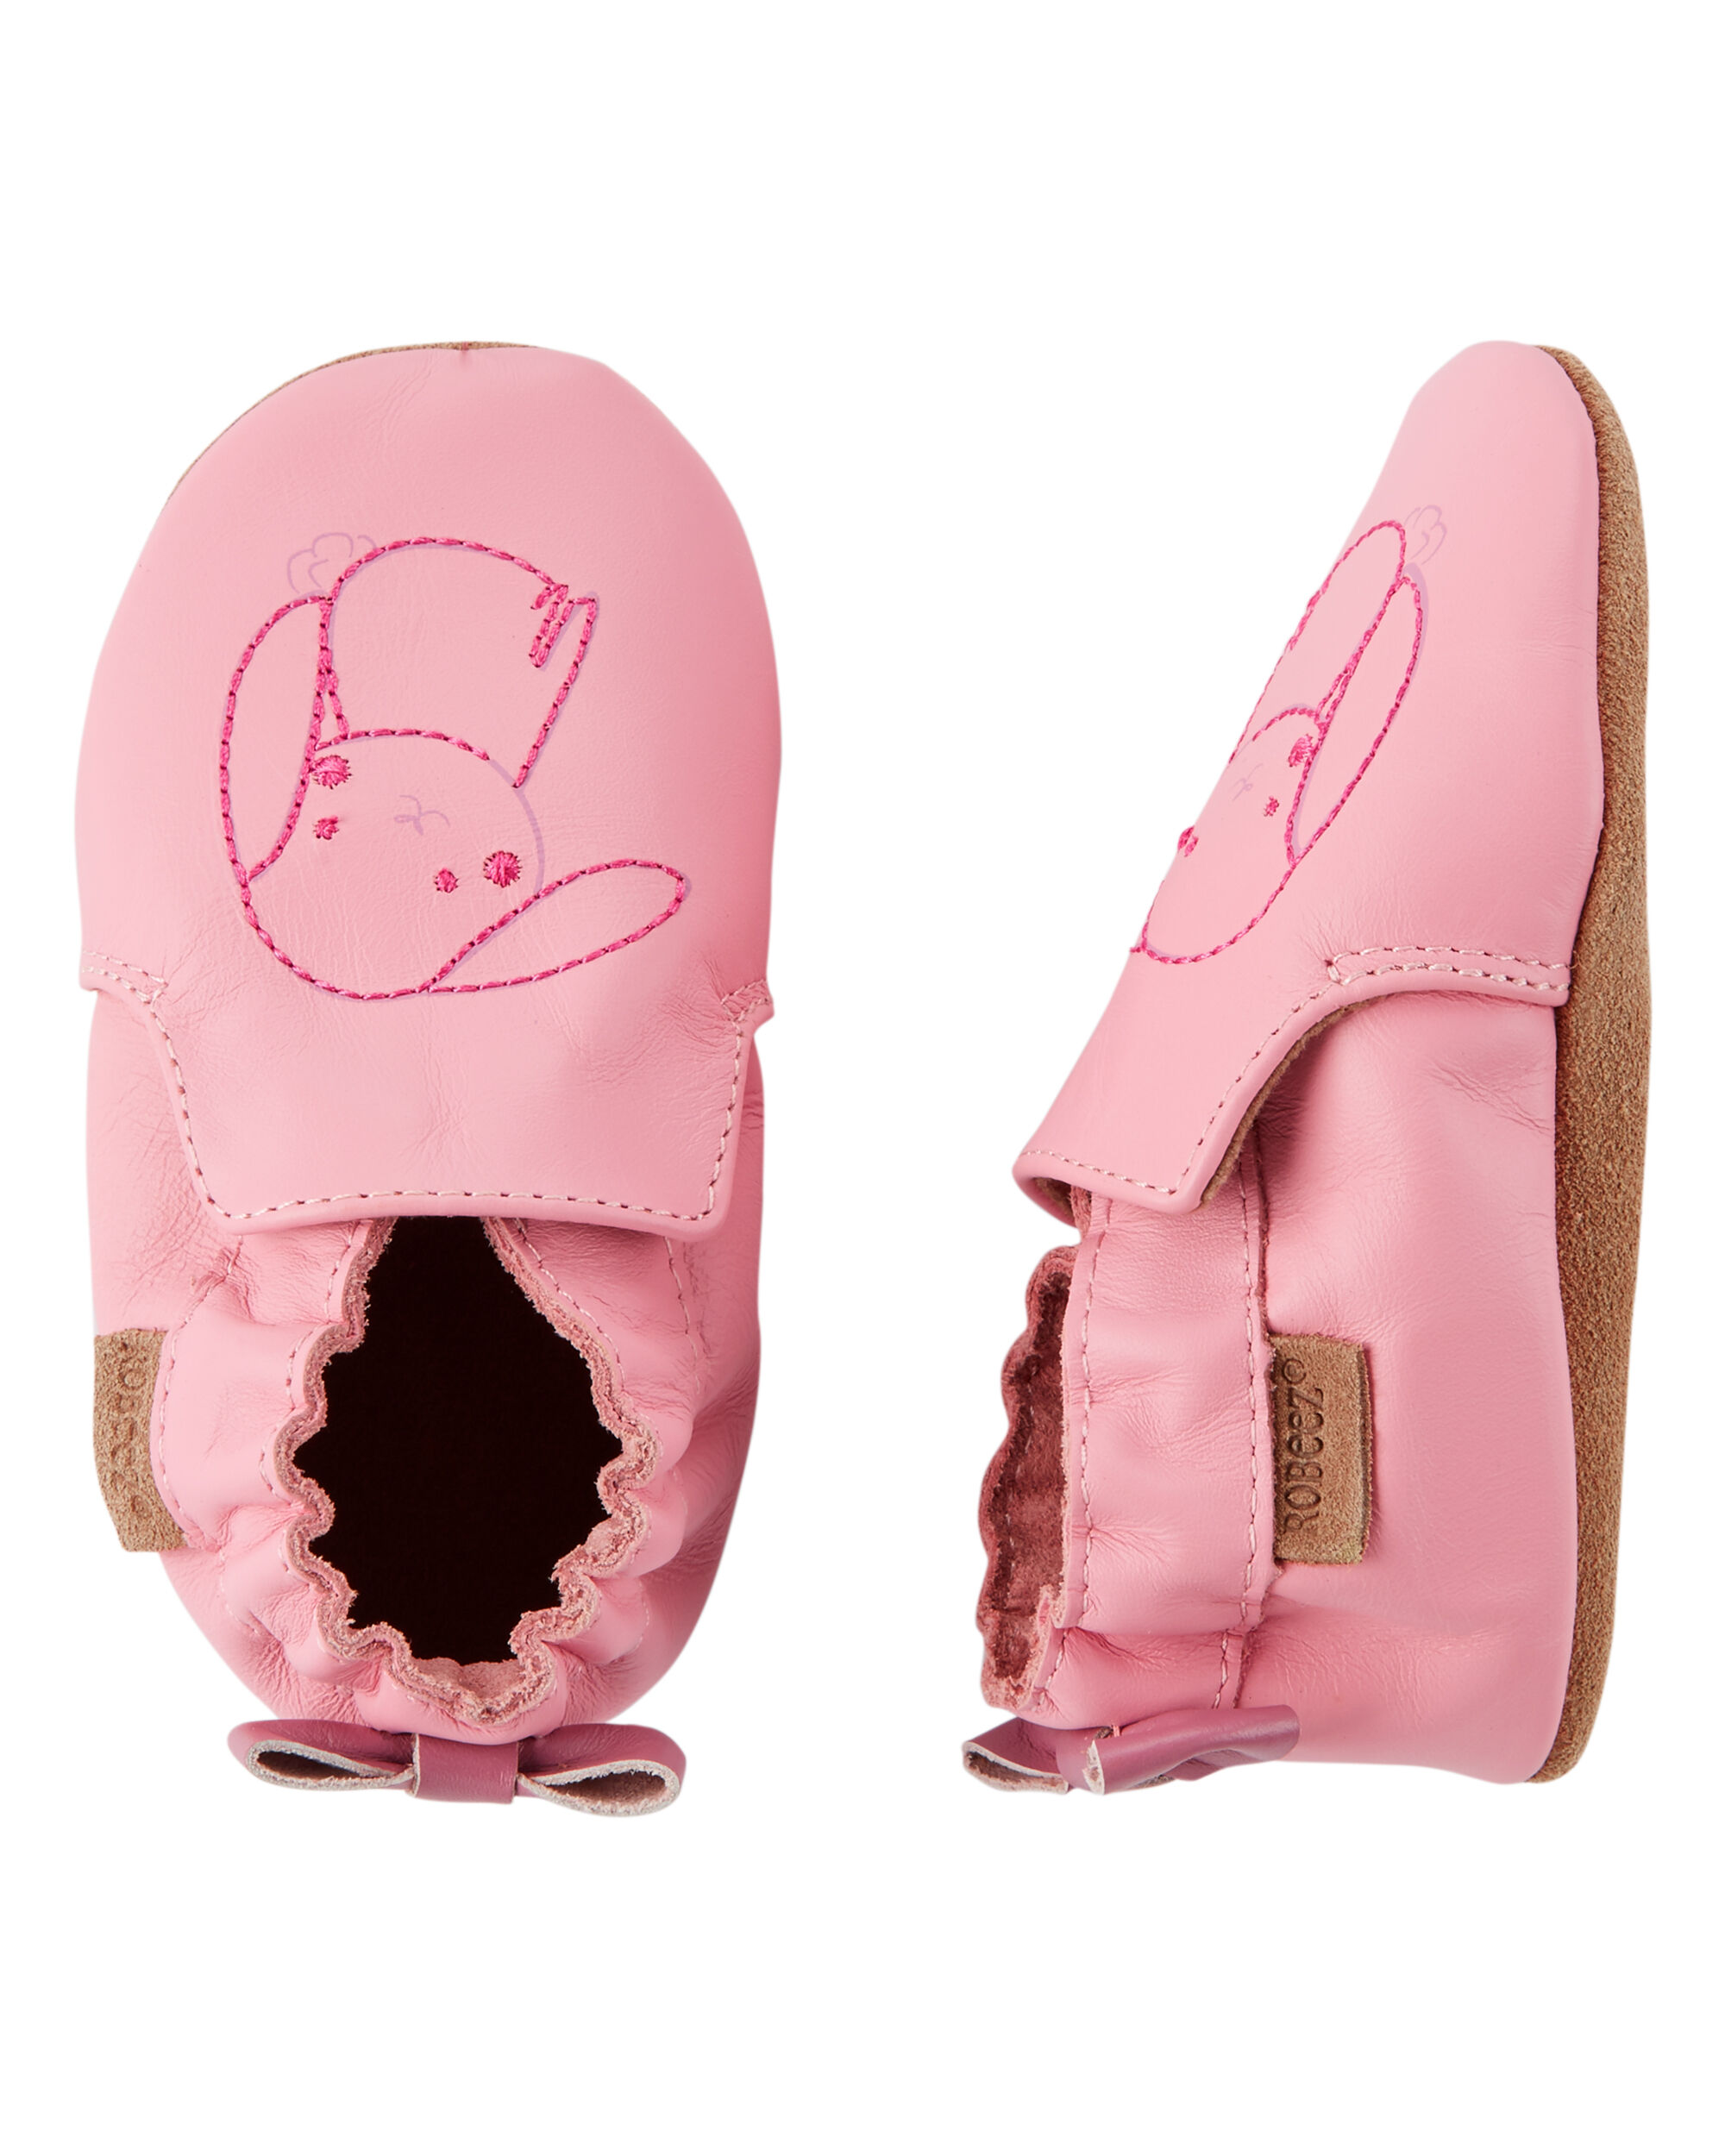 carter's bunny shoes